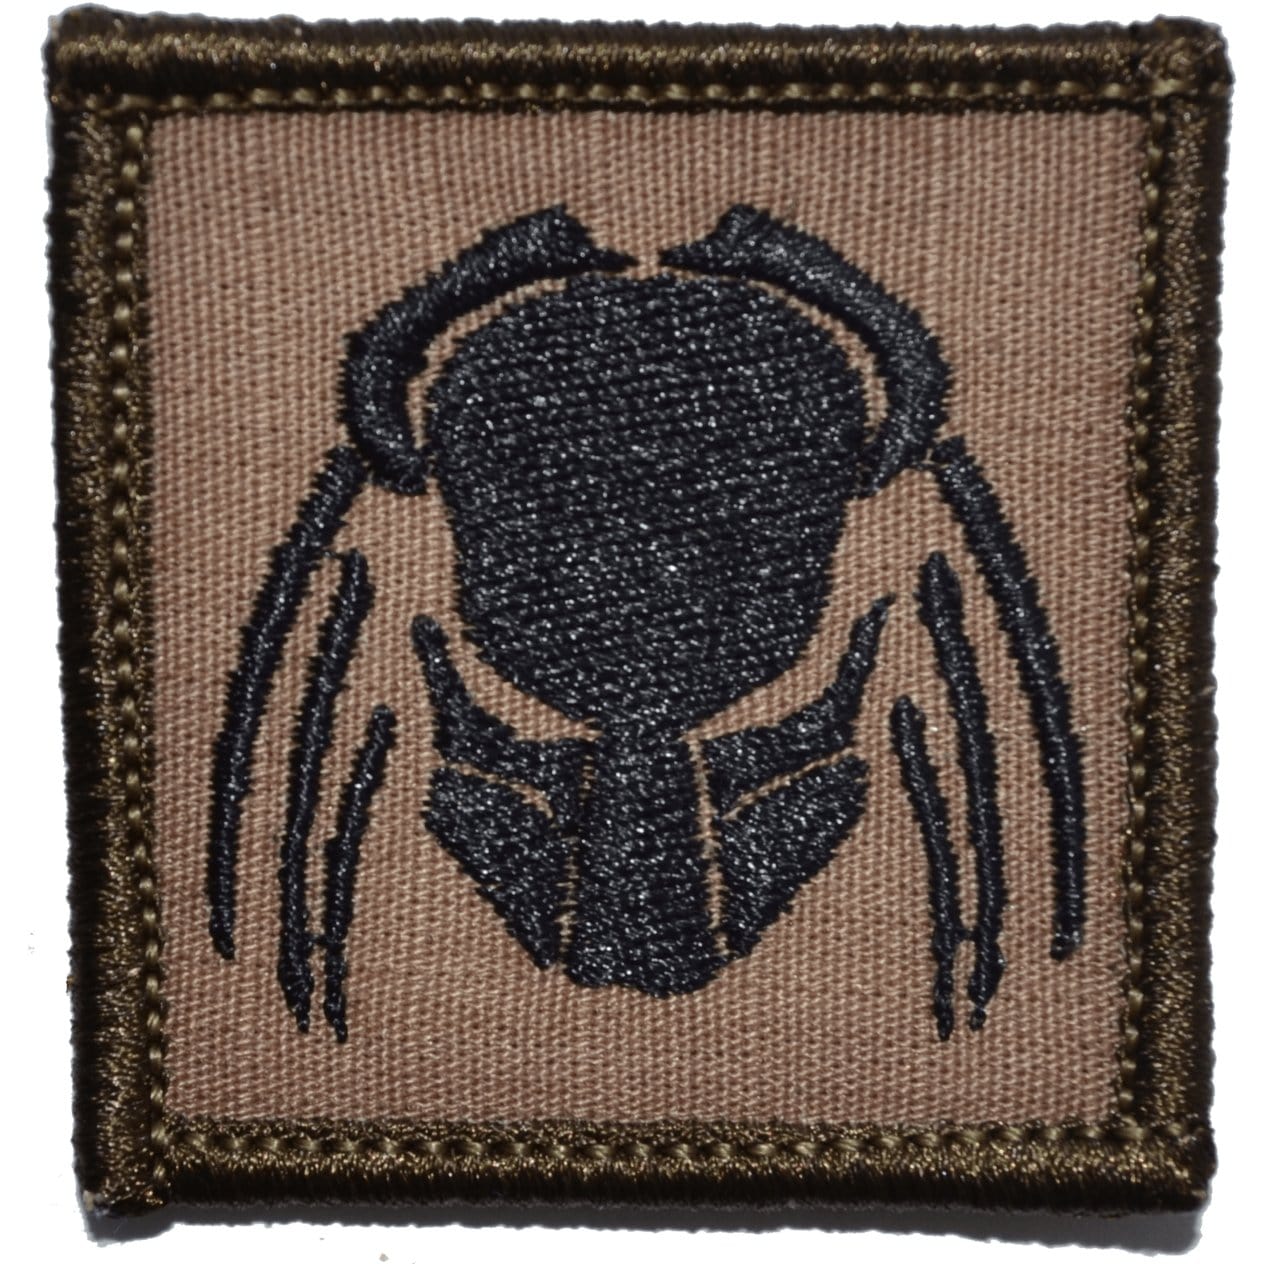 Tactical Gear Junkie Patches Coyote Brown w/ Black Predator Head - 2x2 Patch